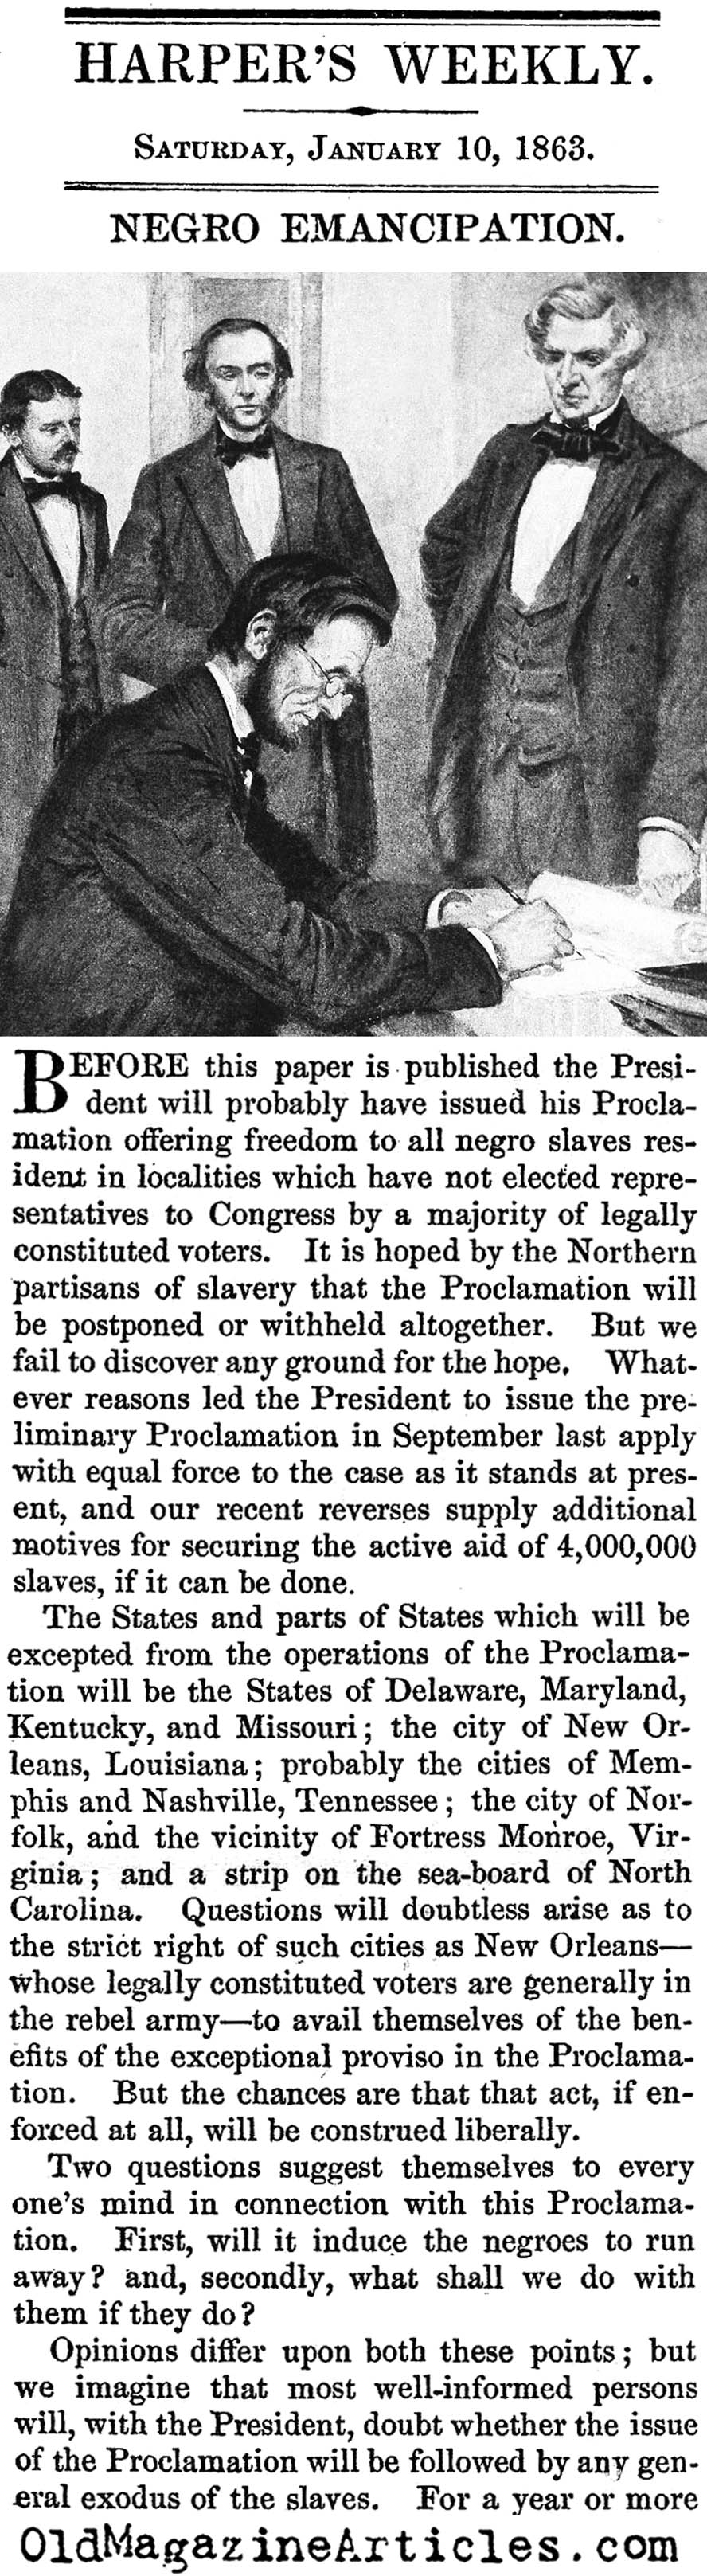 The Emancipation Proclamation (Harper's Weekly, 1863)